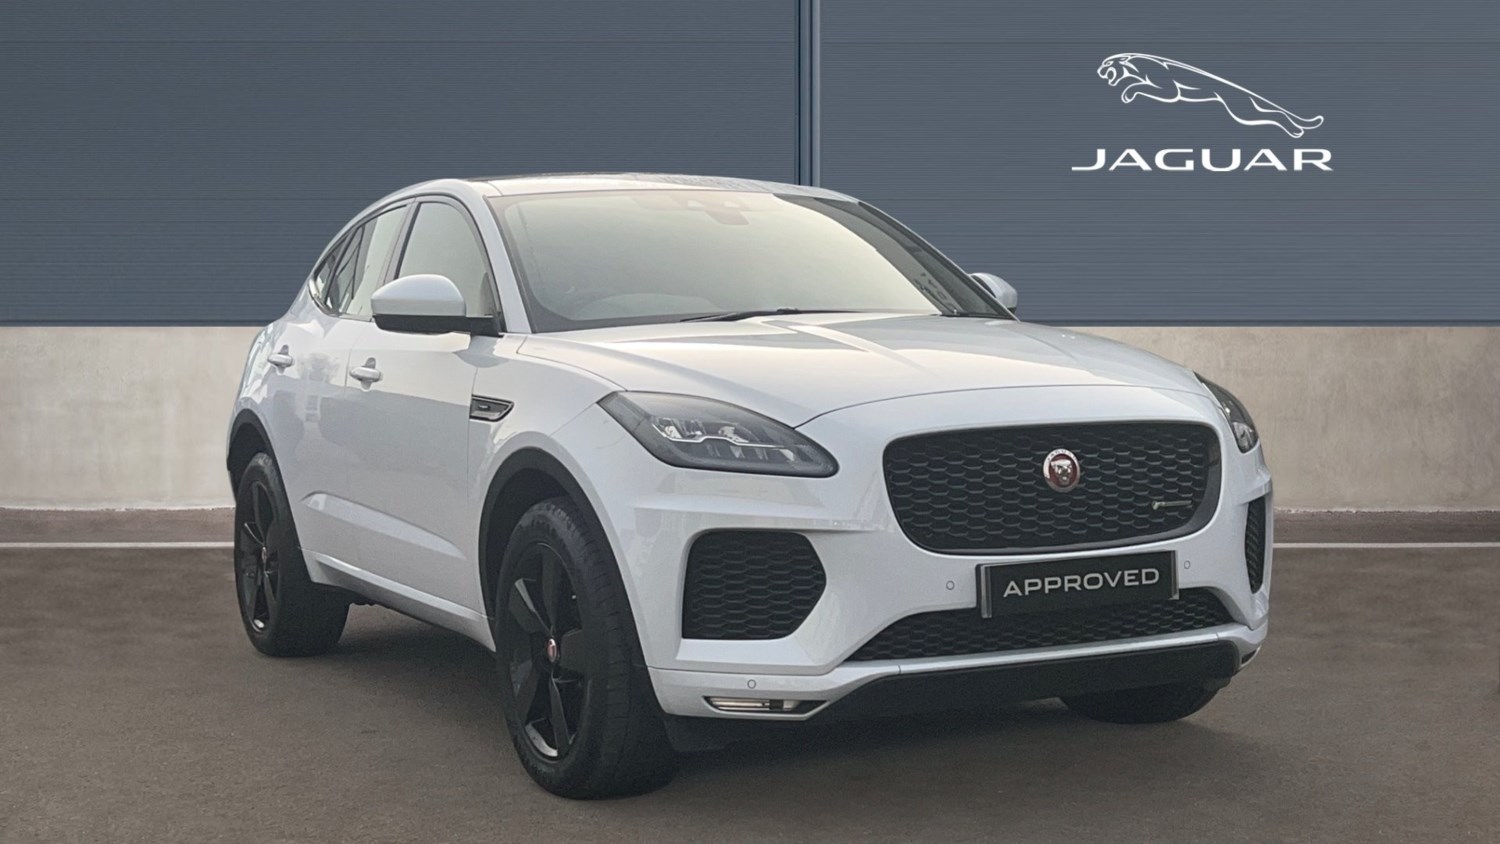 2020 used Jaguar E-Pace 2.0d (180) Chequered Flag Edition